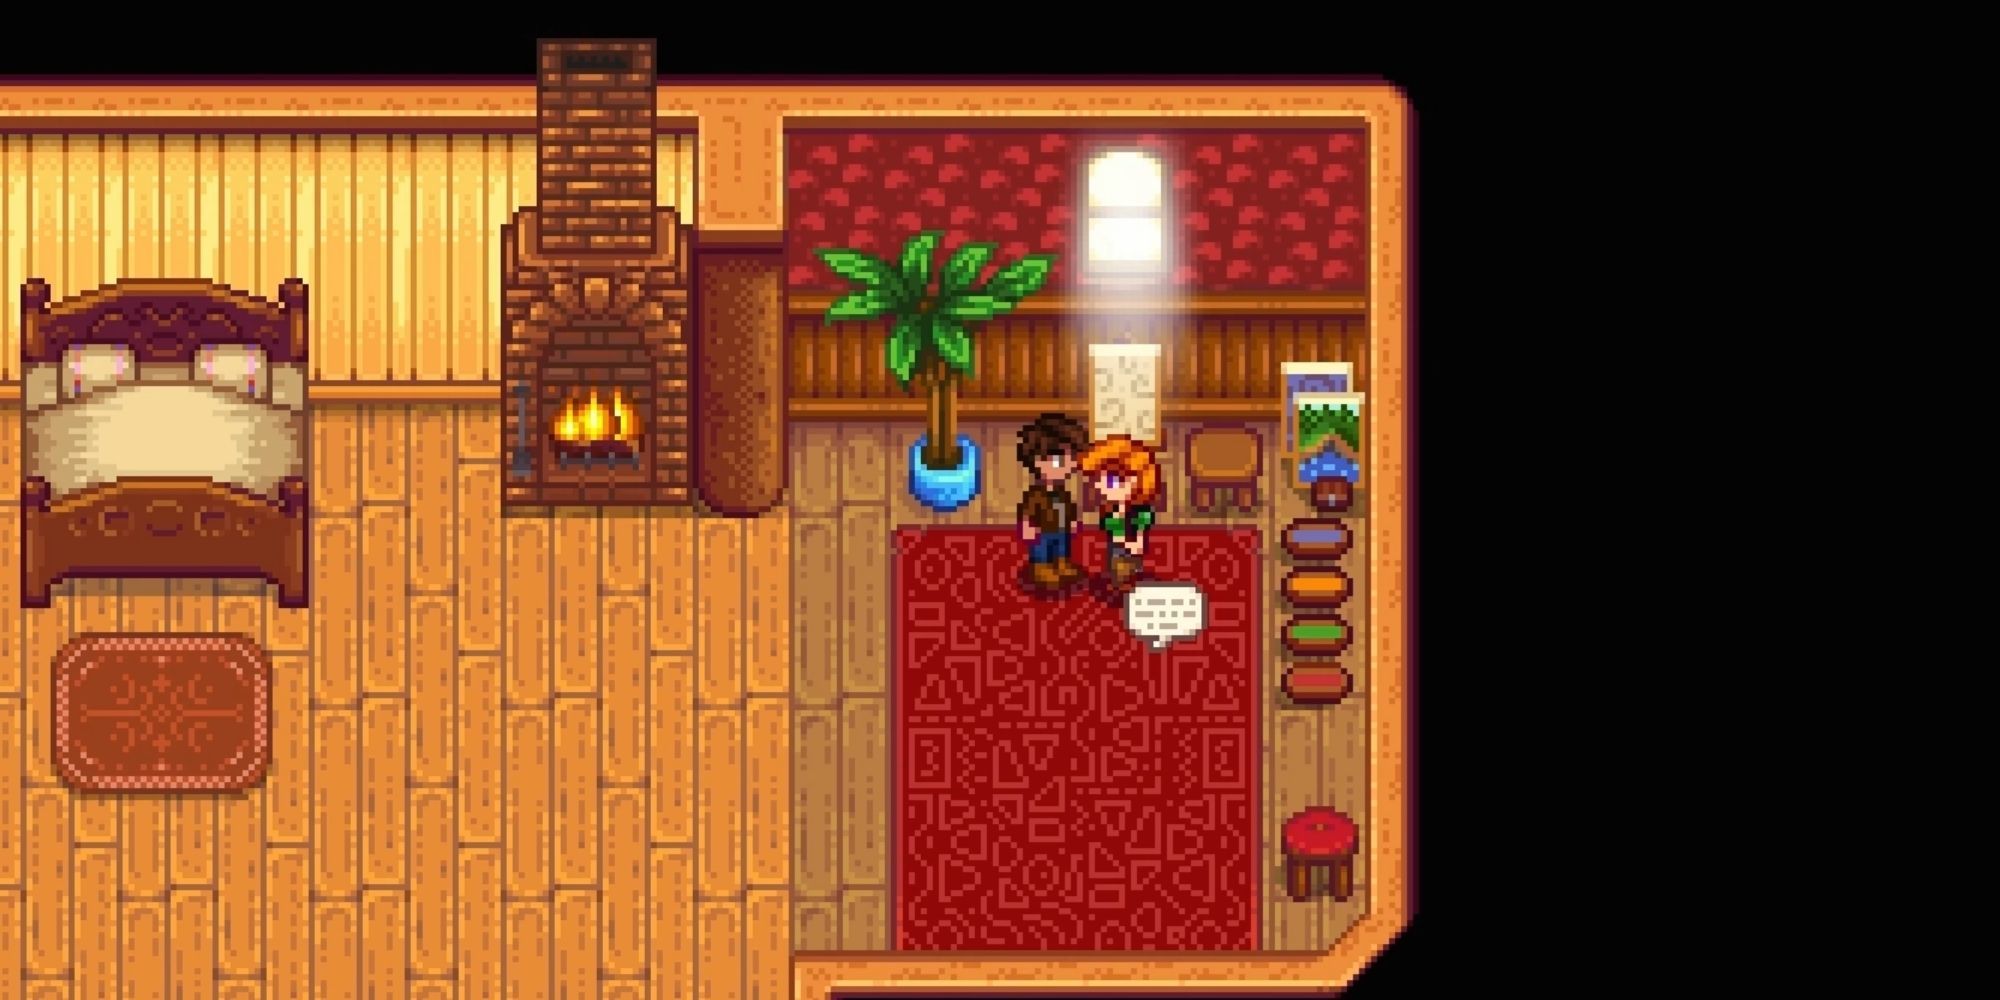 The Player Character And Leah In Her Room In Stardew Valley